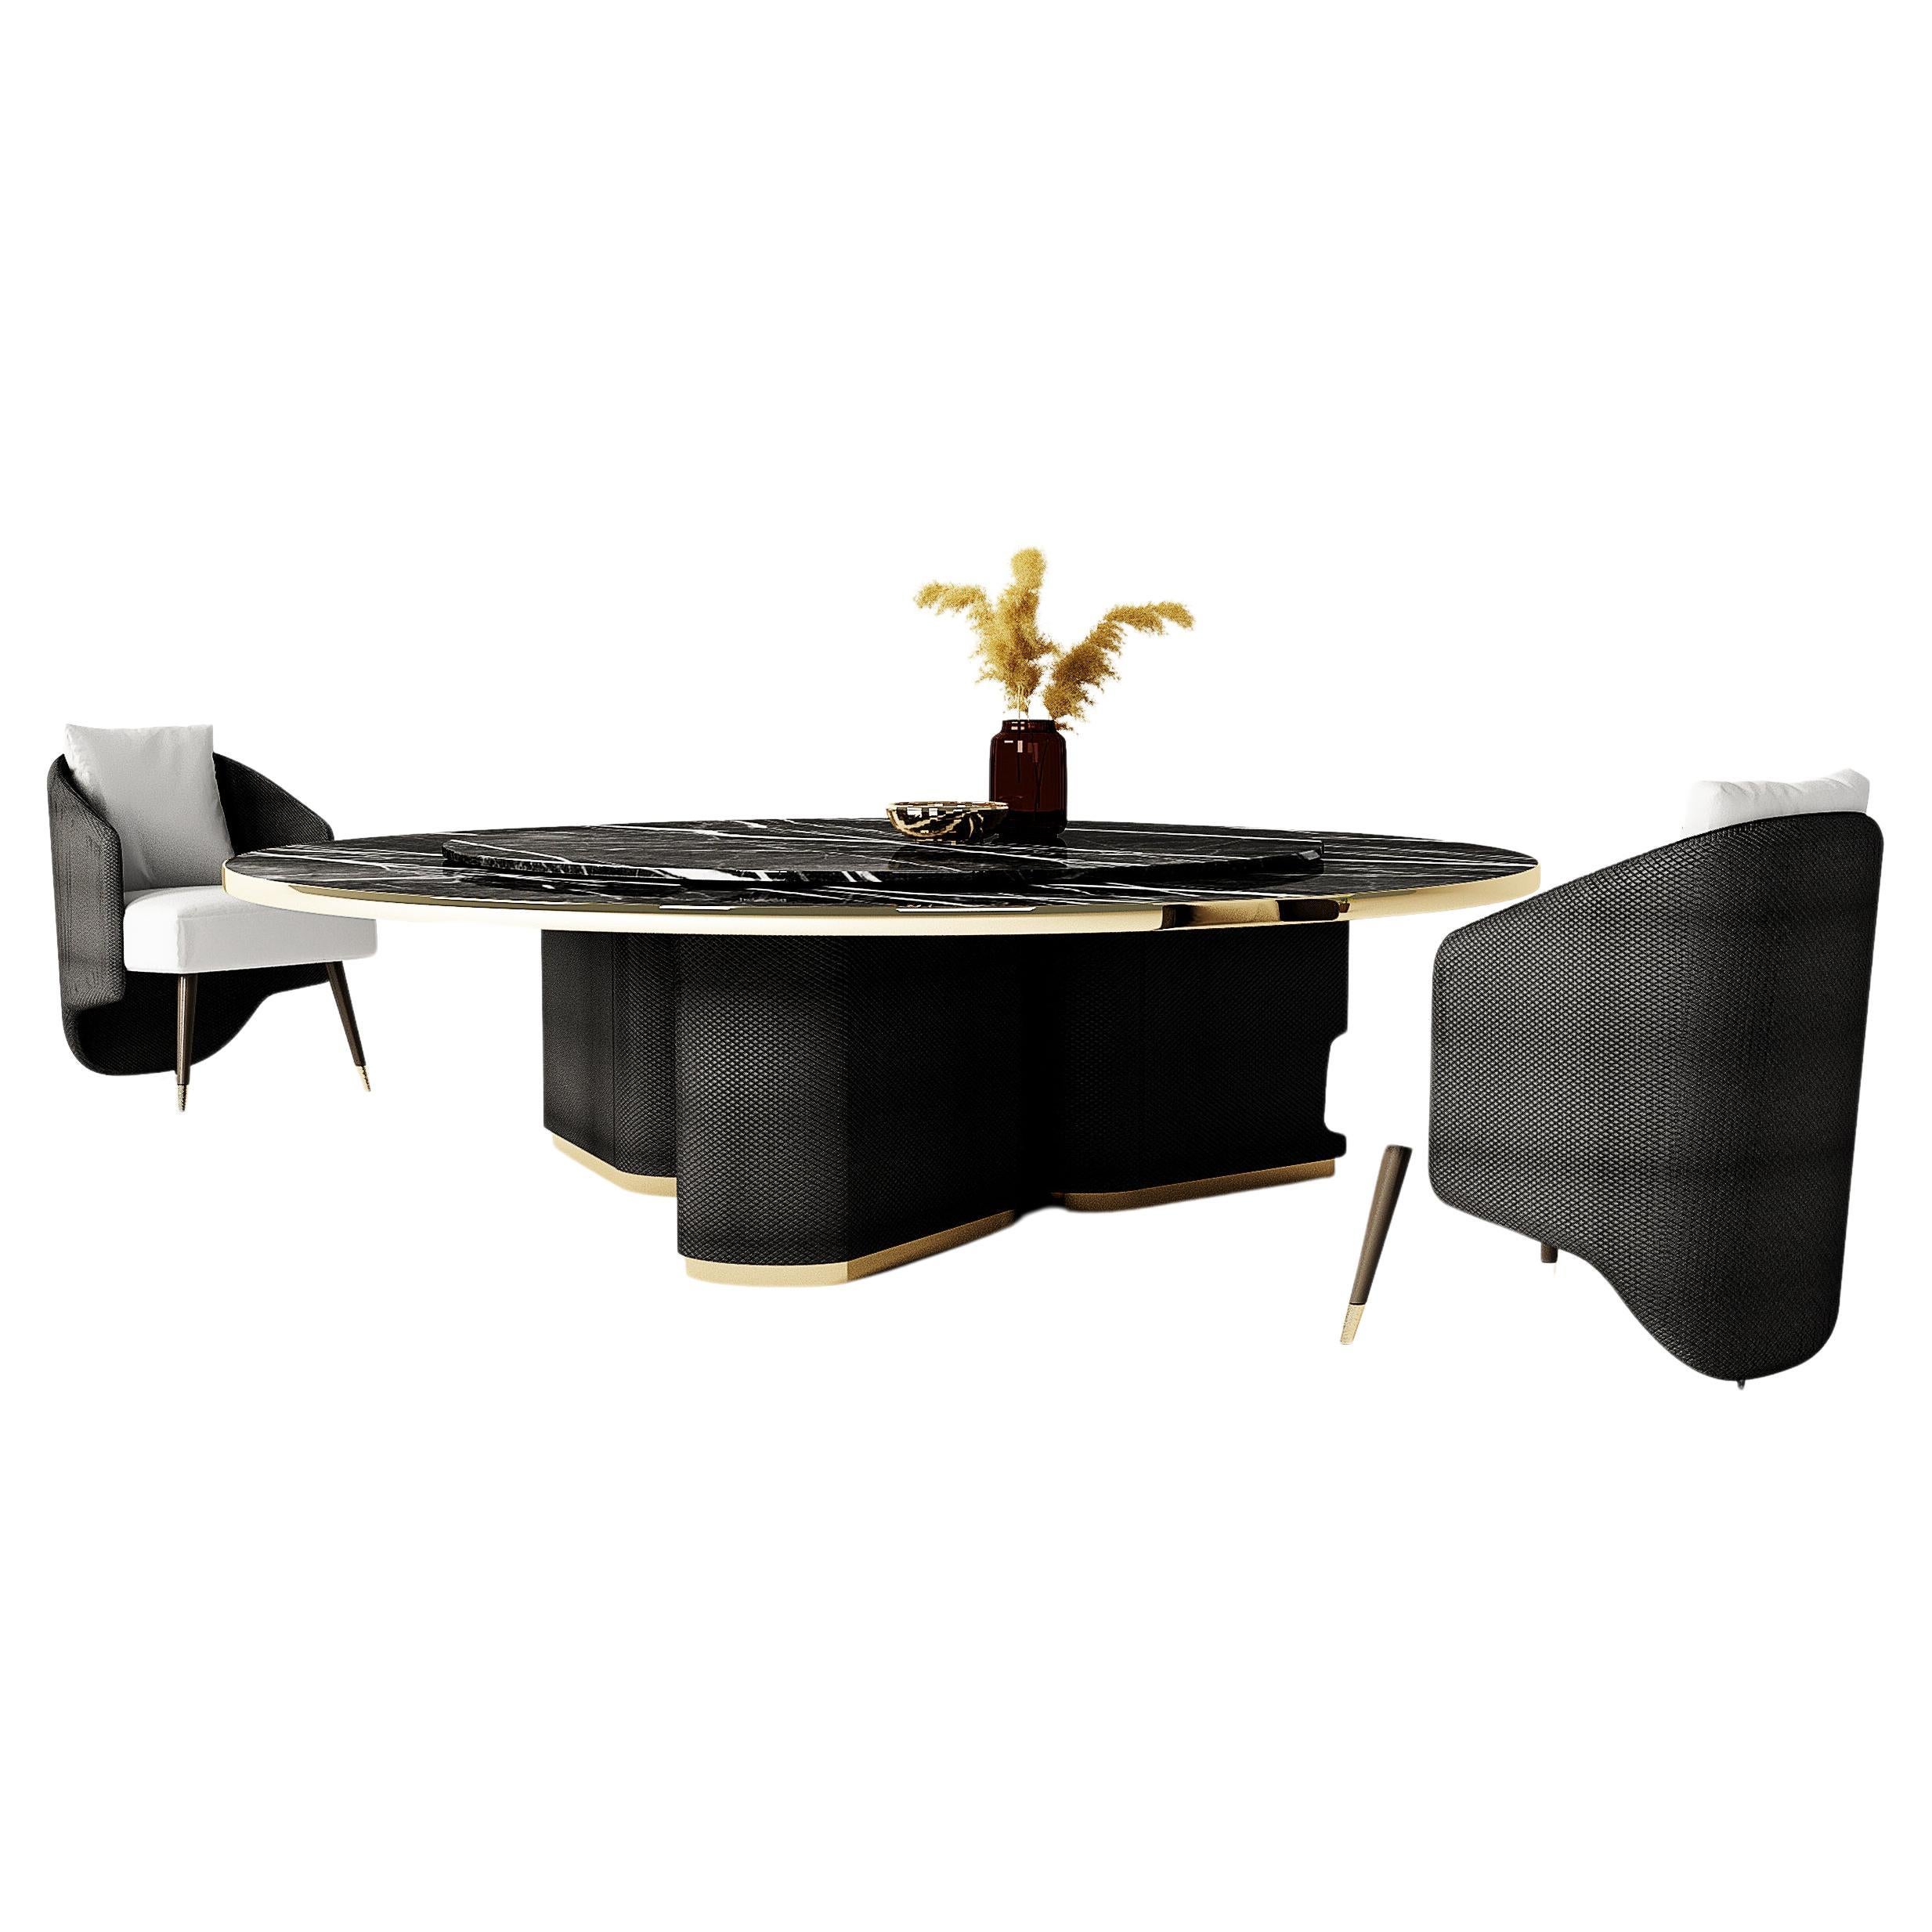 Fabian dining table with lazy susan, d.280 cm in sahara noir and woven leather For Sale